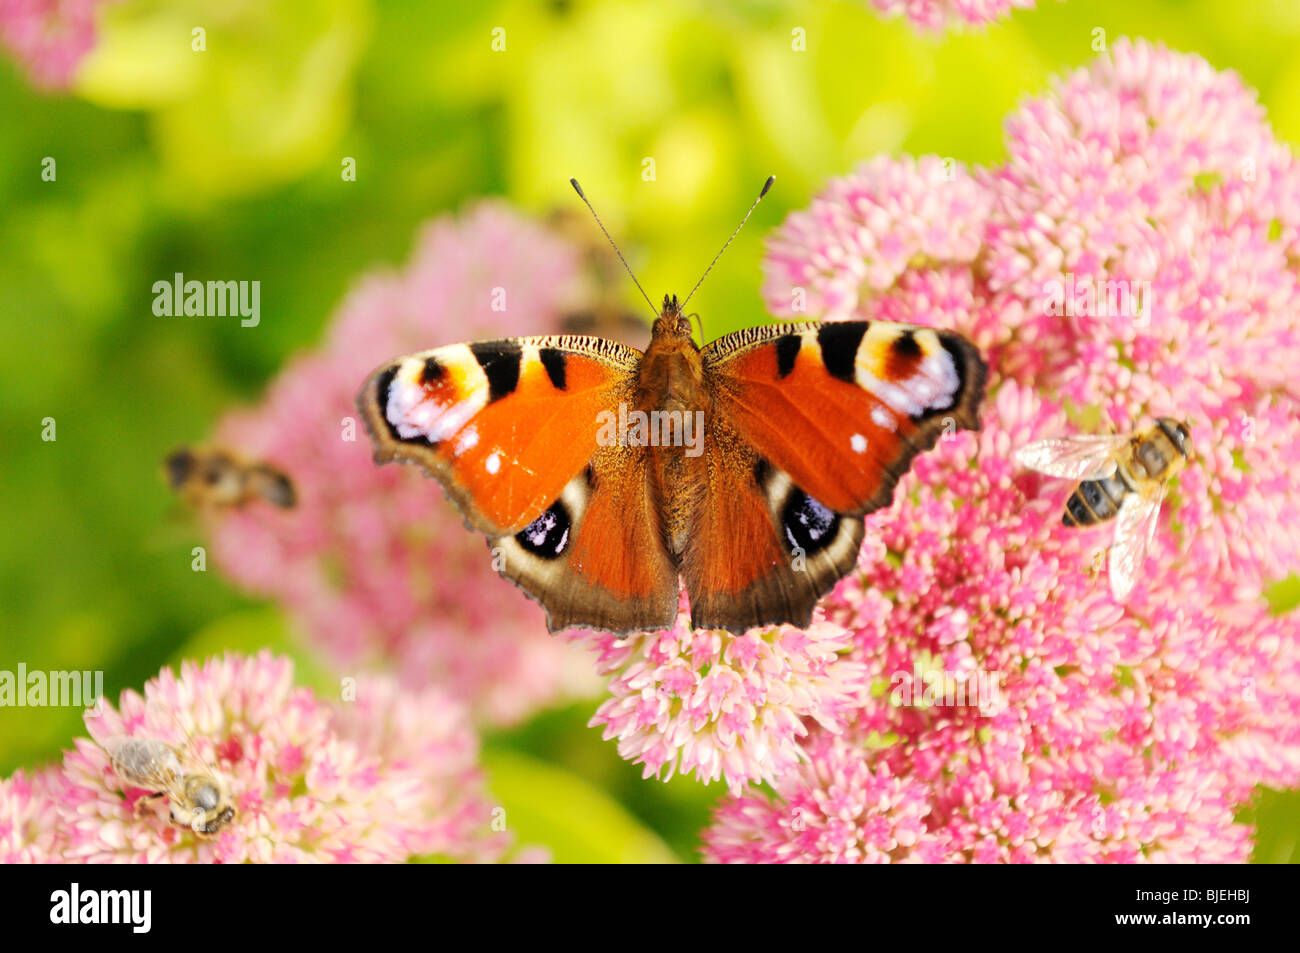 Peacock butterfly (Inachis io), bird's eye view, close-up Stock Photo